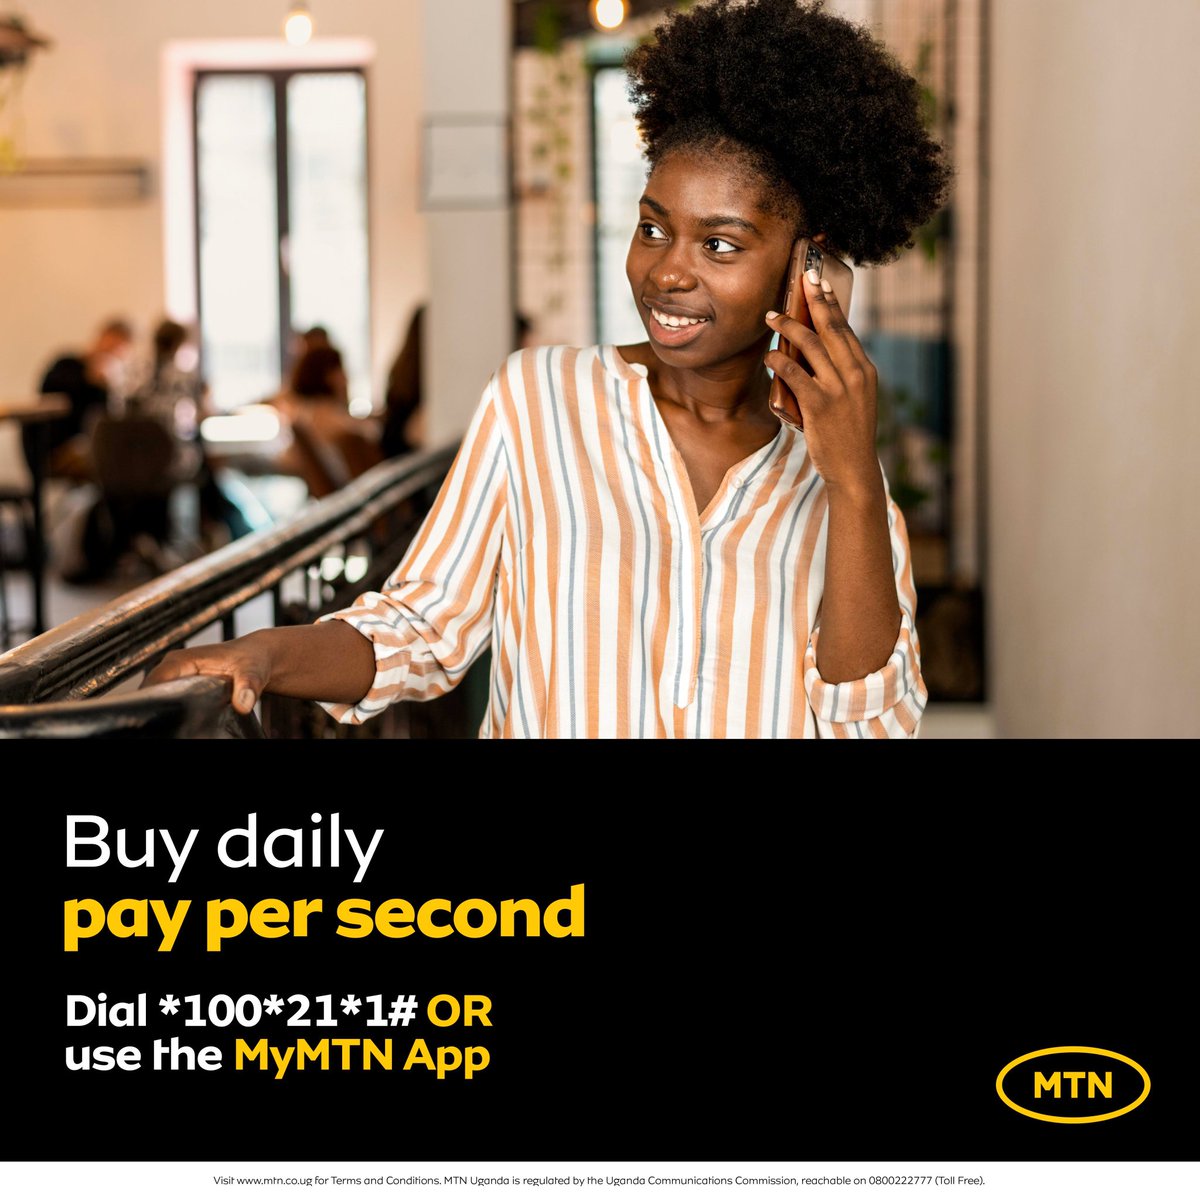 Monday business calls just got cheaper and durable with @mtnug! 🙌 
Activate your daily bundles and enjoy per-second offer.
Activate now via #MyMTN app or *100*21*1#.  #MTNVoiceBundles